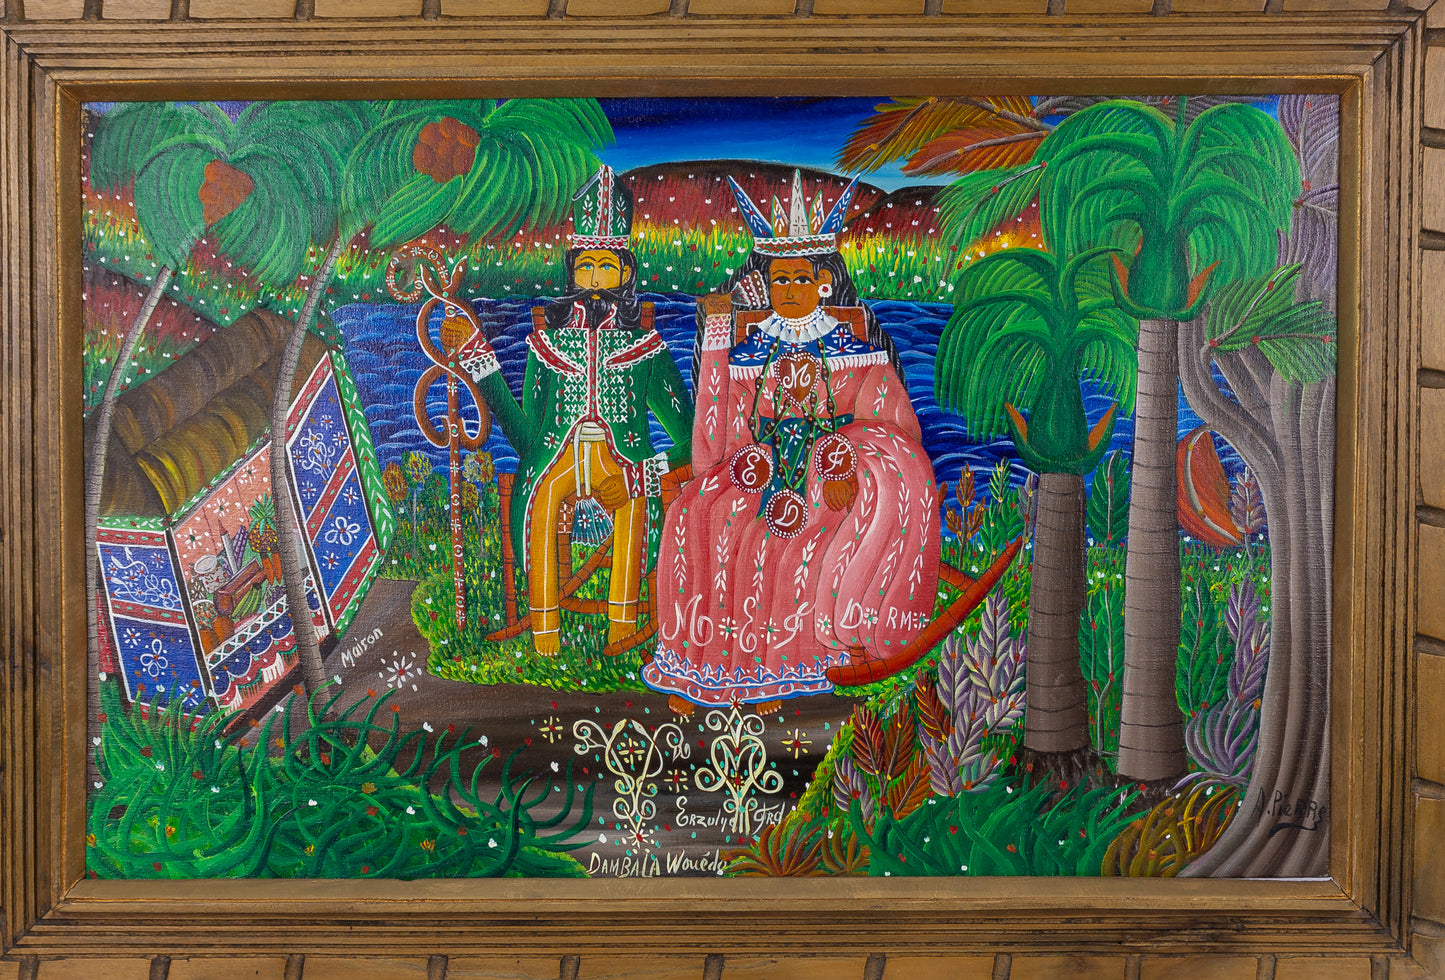 Andre Pierre (1914-2005) 20"x32" "Erzuly Freda Dambala Wouedo" c1980 Oil on Canvas Framed Painting  #22SS